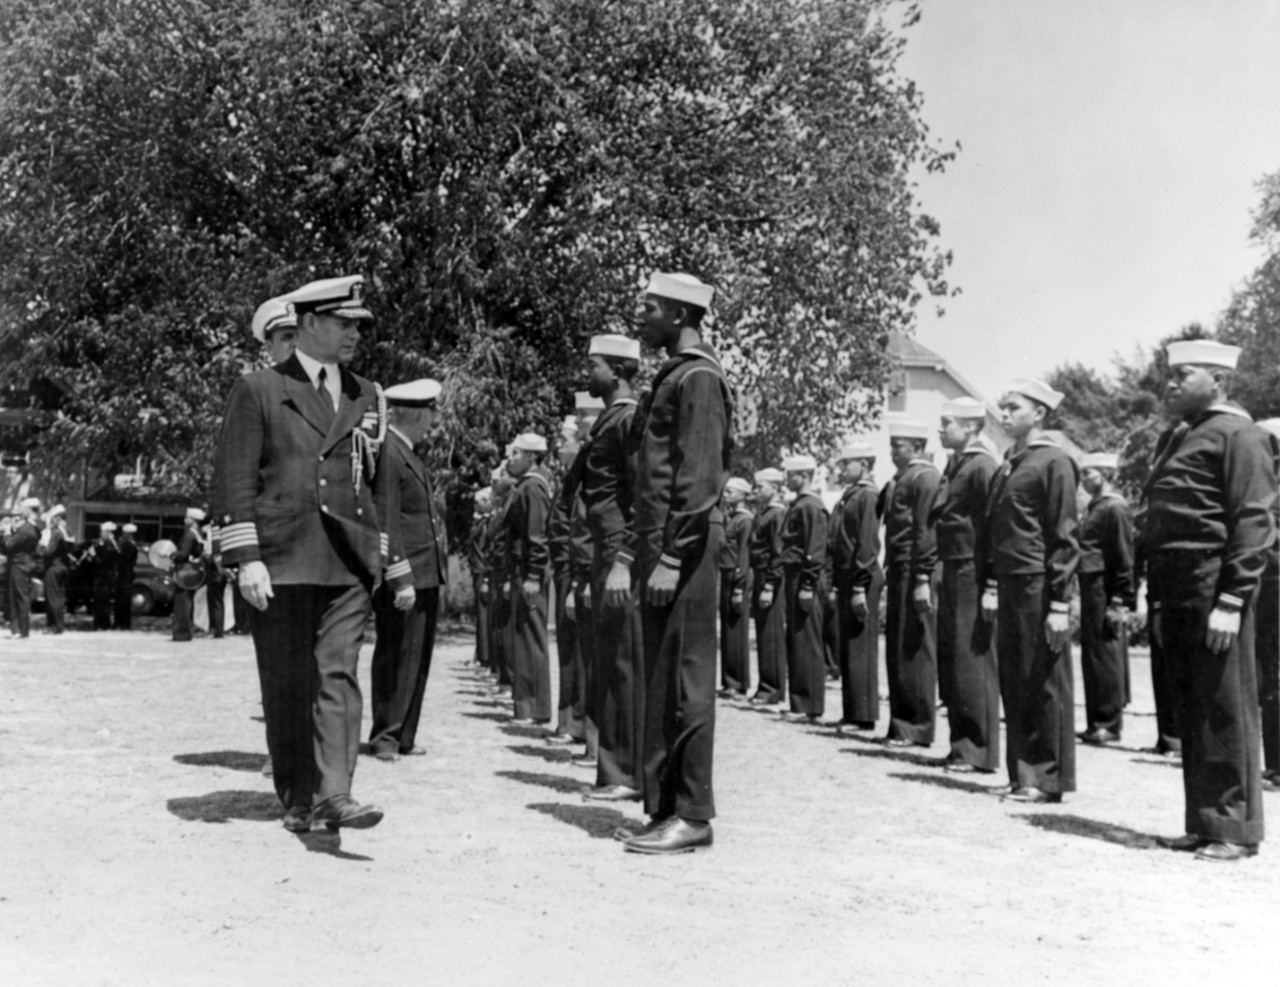 Black men dressed in Navy enlisted uniform arranged in formation with a group of White officers walking along the front line.